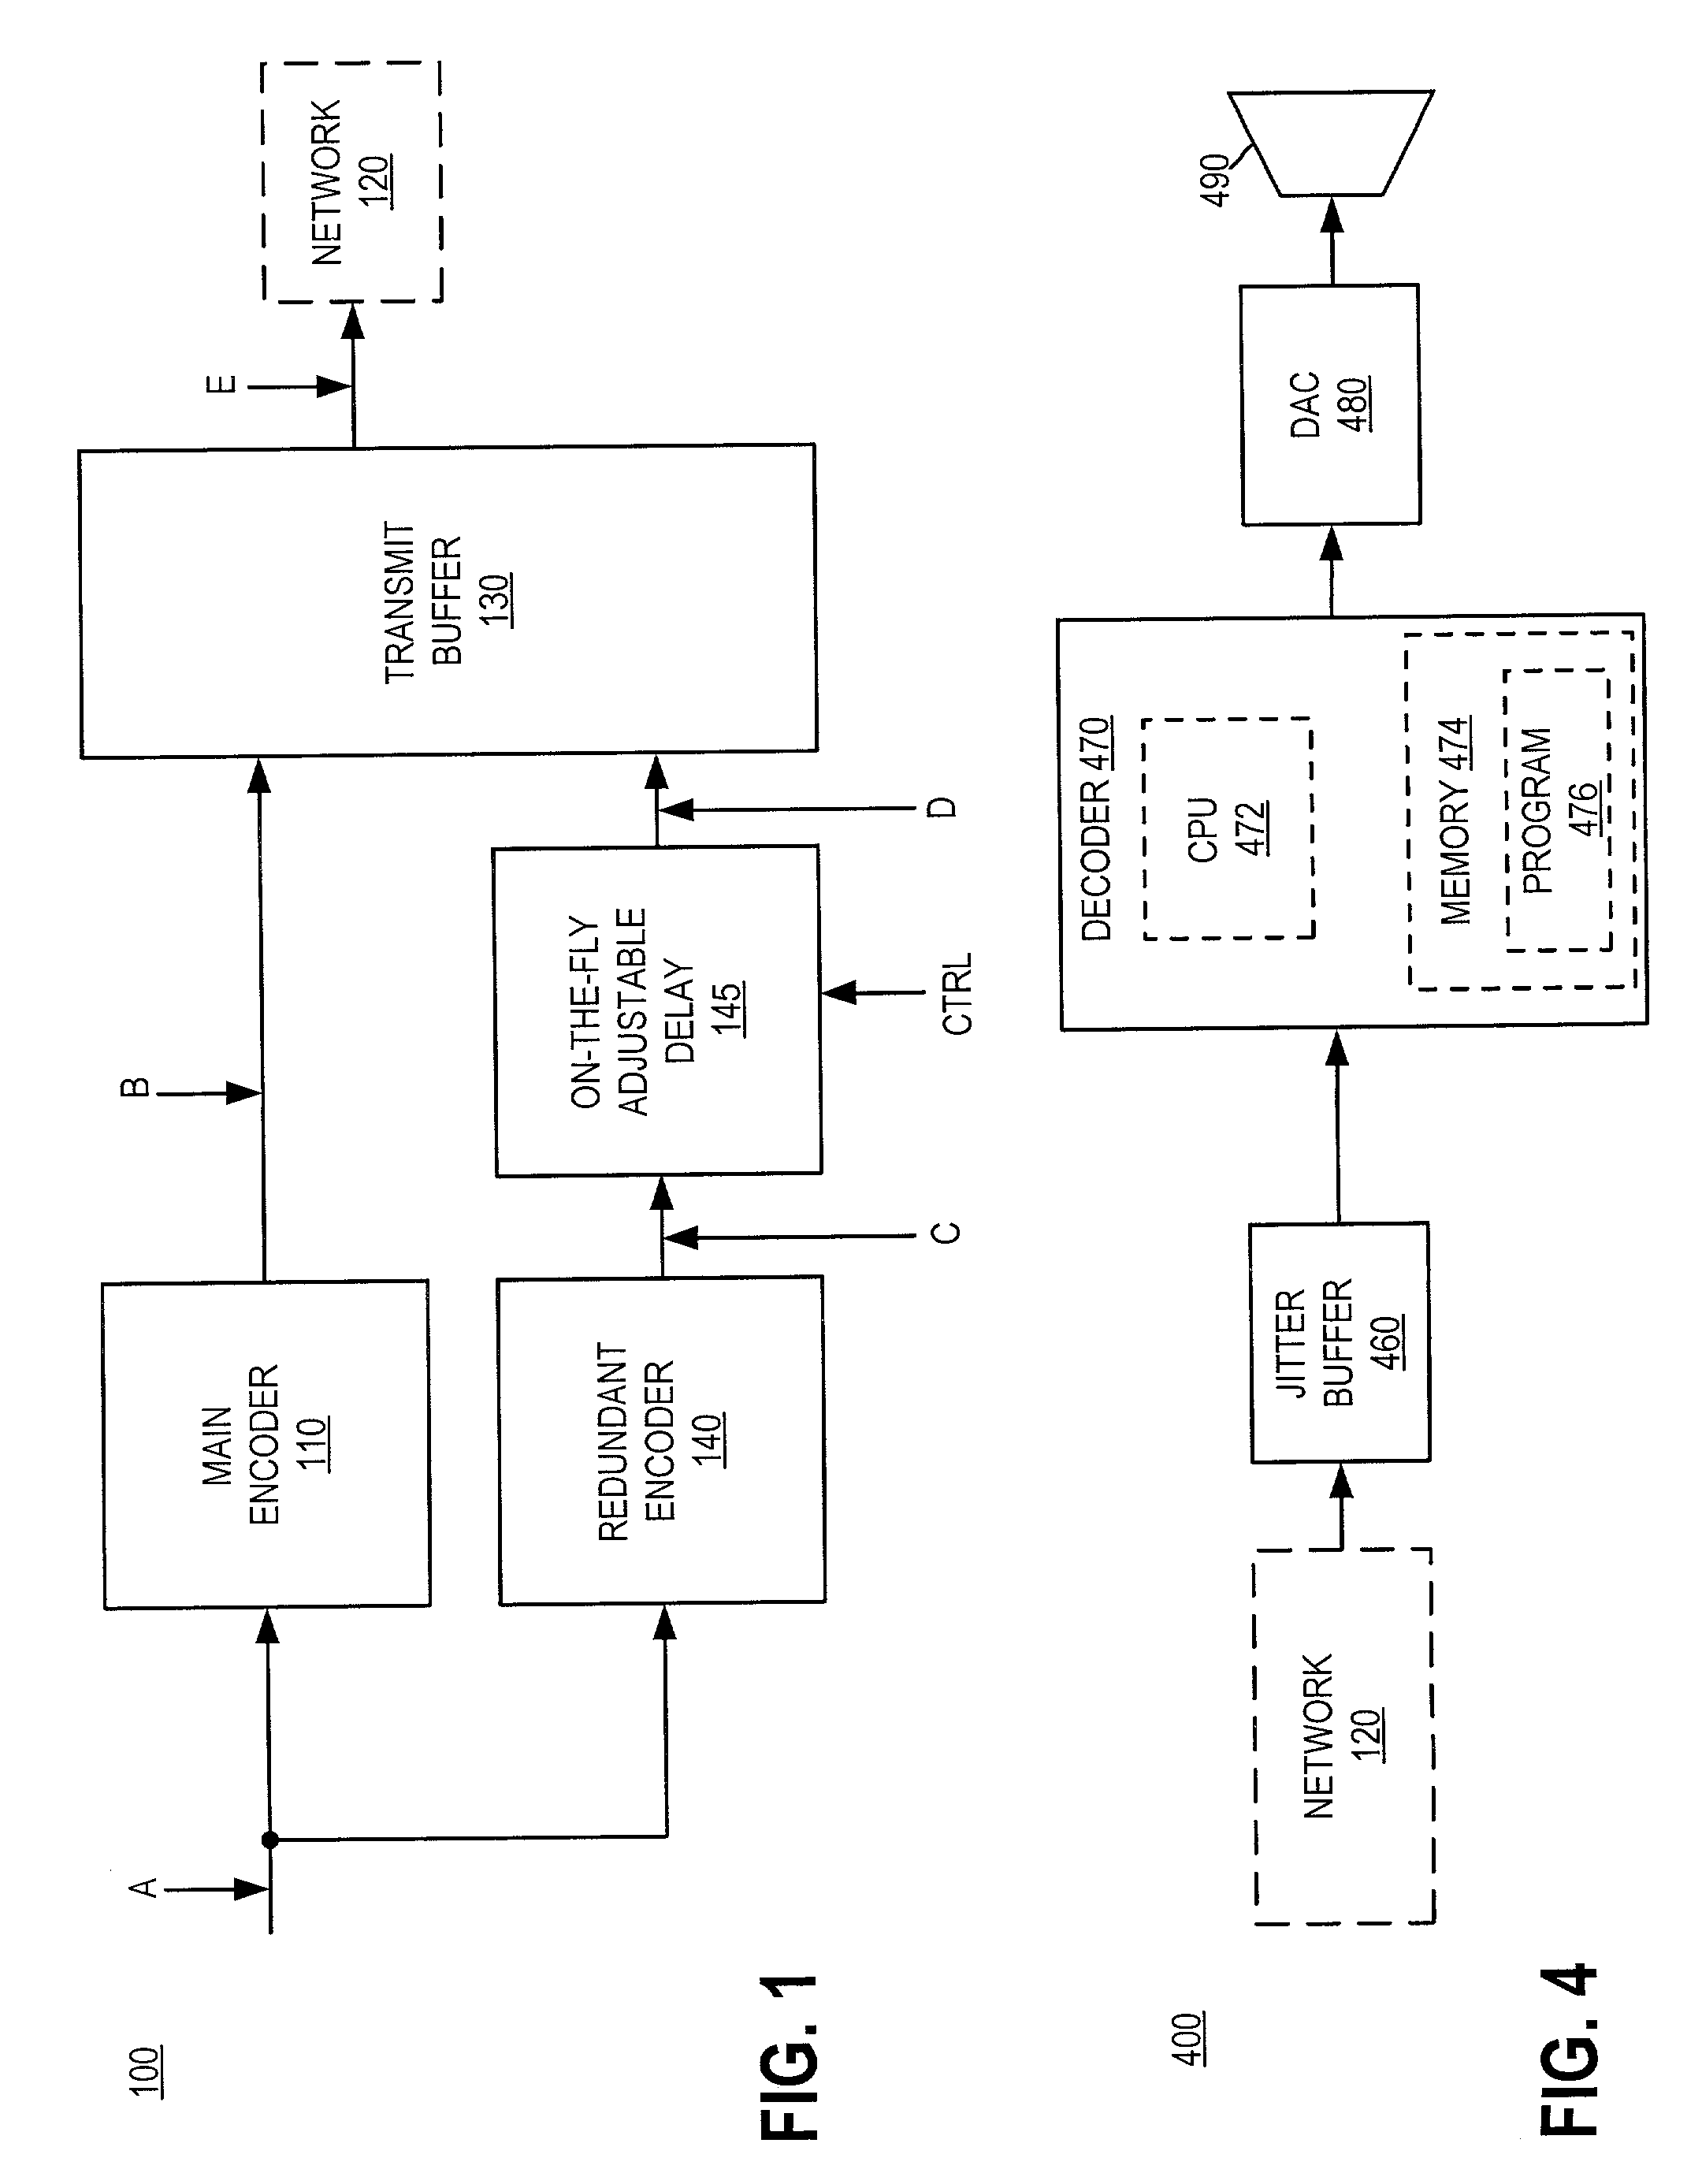 Devices, softwares and methods for redundantly encoding a data stream for network transmission with adjustable redundant-coding delay